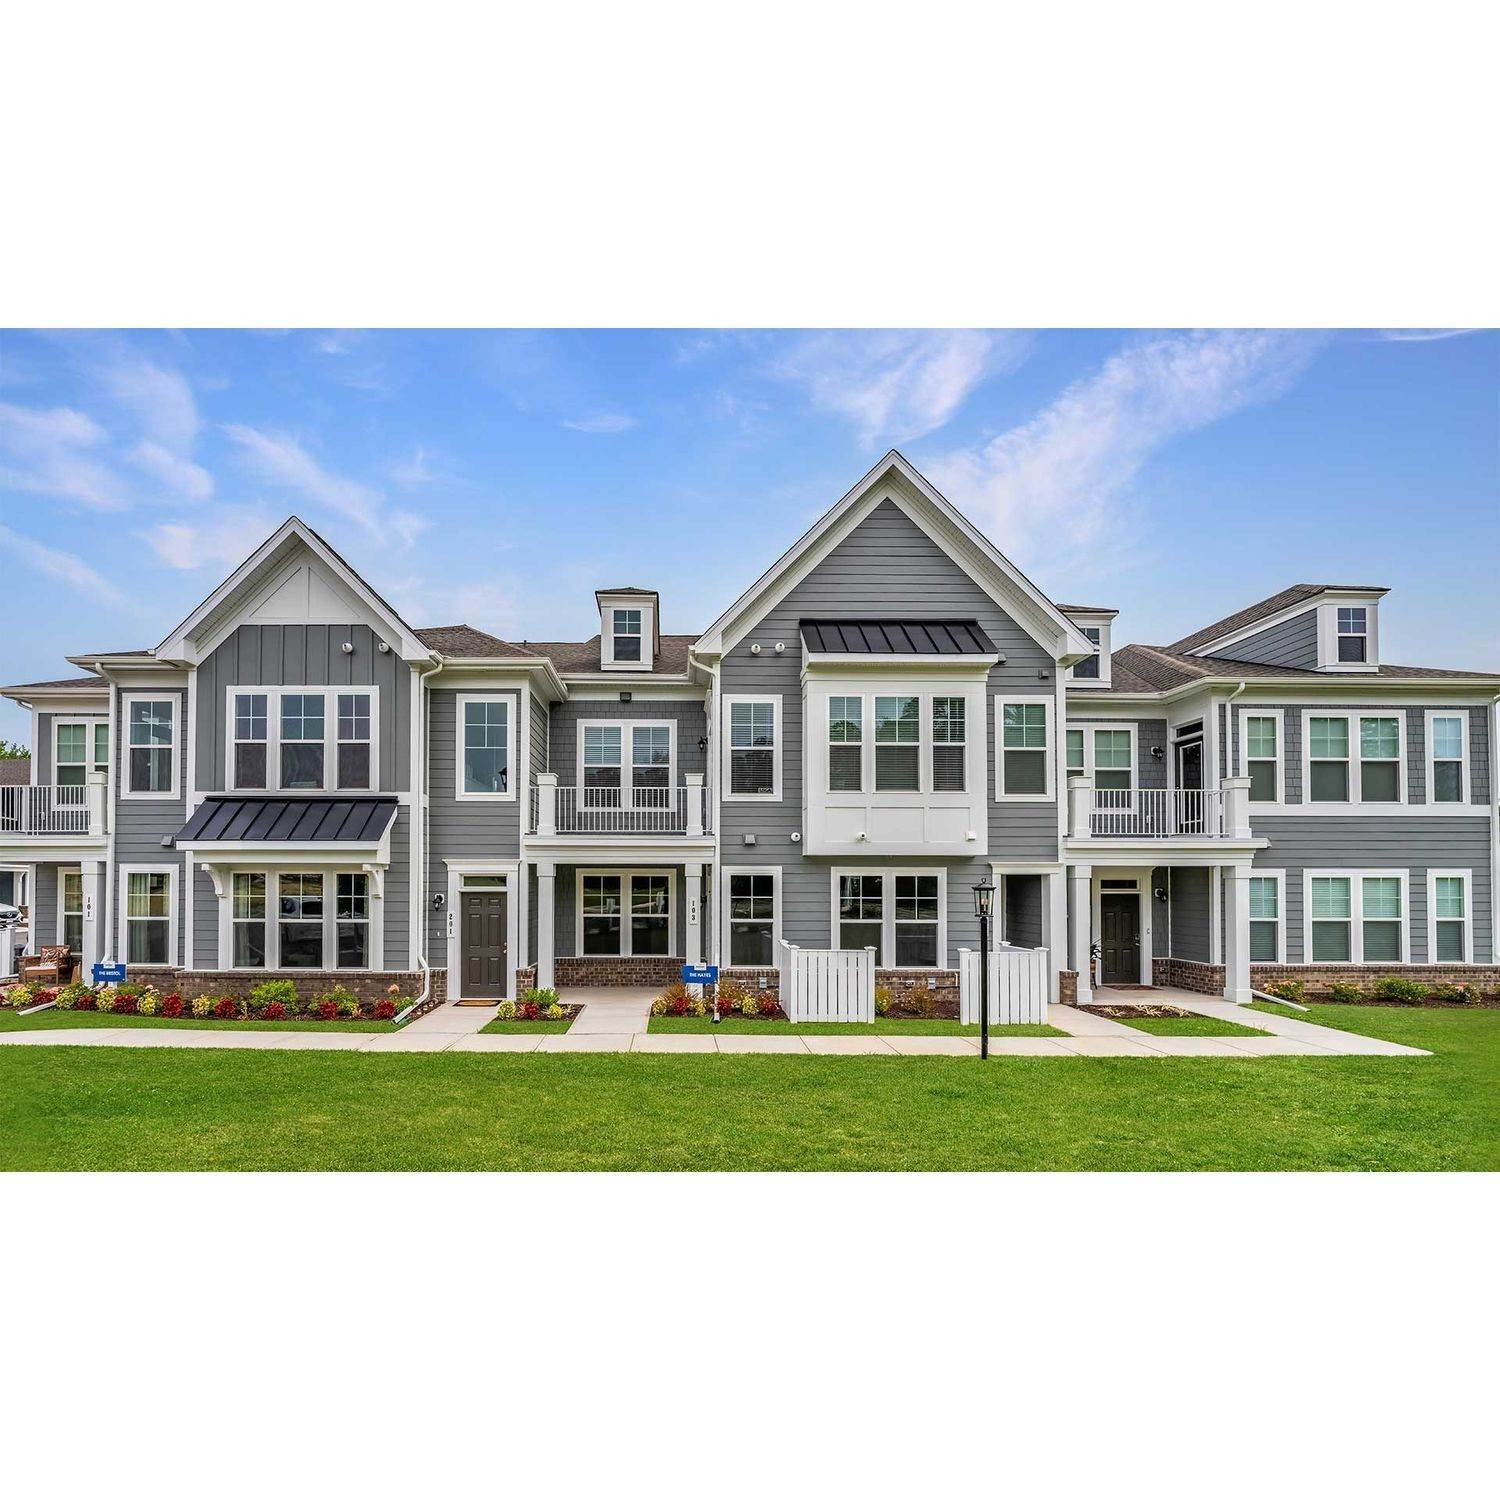 4. The Pointe at Twin Hickory gebouw op 4605 Pouncey Tract Road, Glen Allen, VA 23059